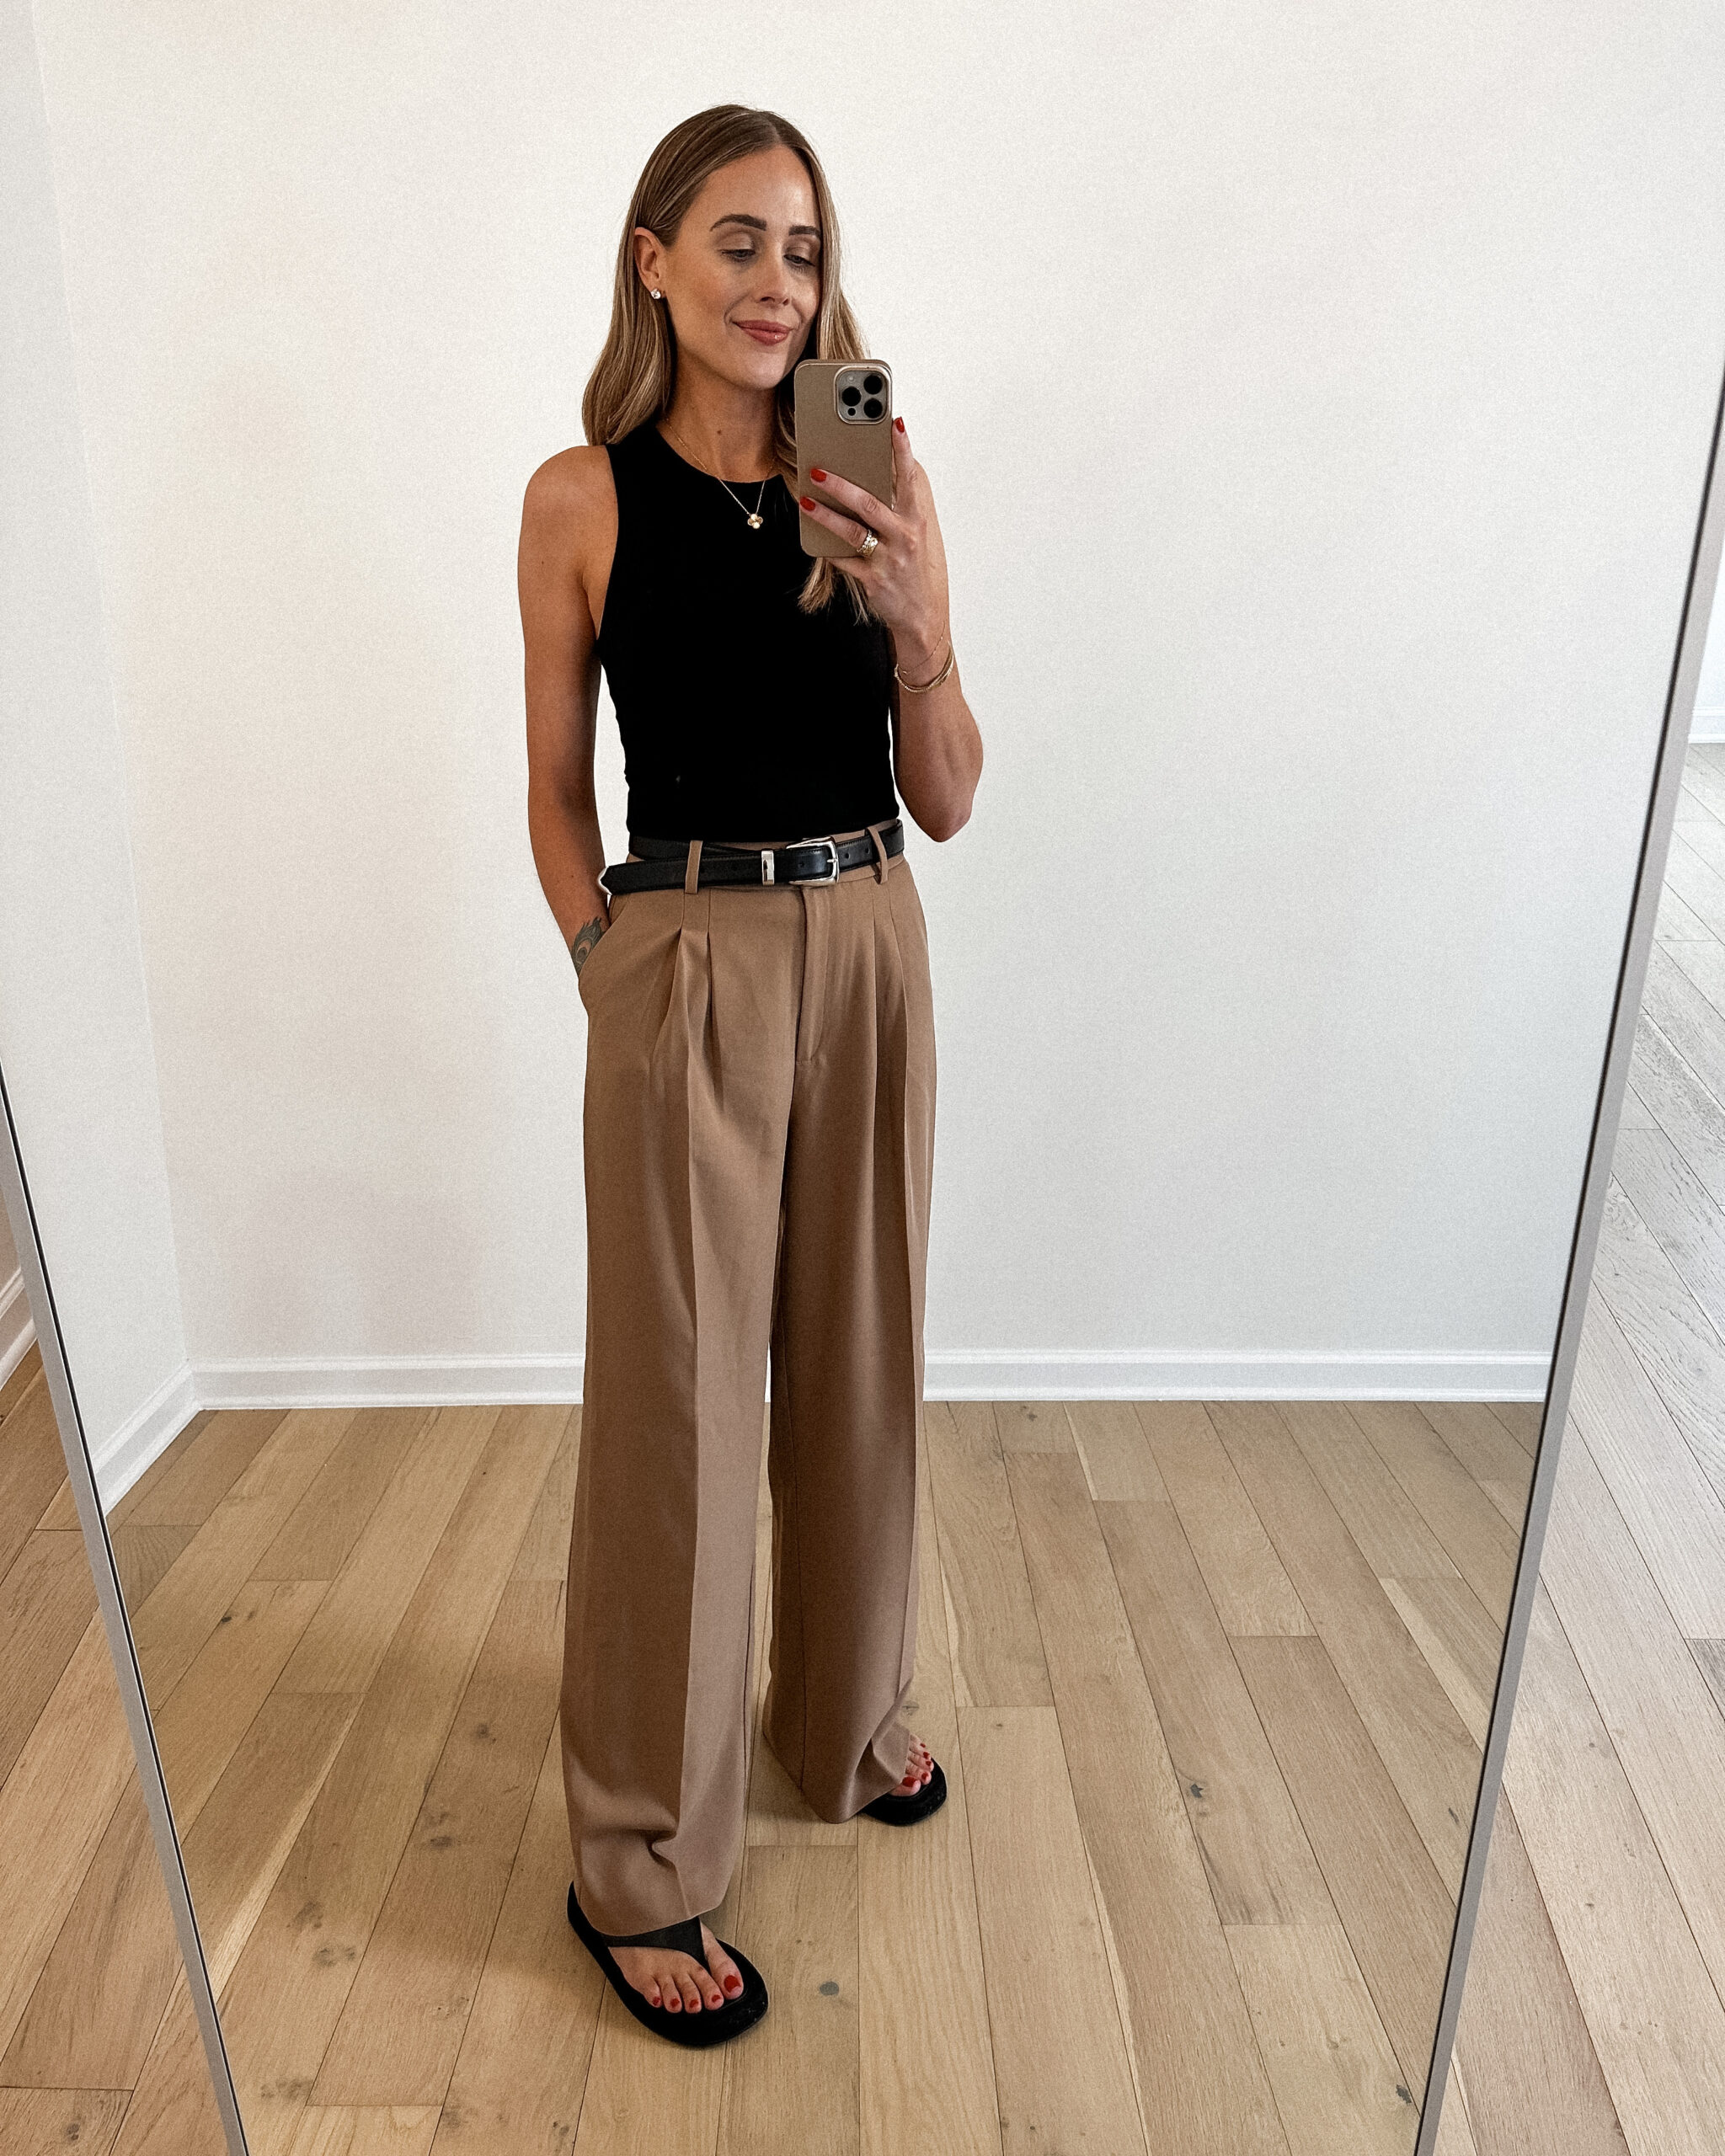 Fashion Jackson Wearing MAYSON the label black rib fitted tan,, camel wide leg trousers, khaite black benny belt, the row black ginza leather suede sandals, casual outfit